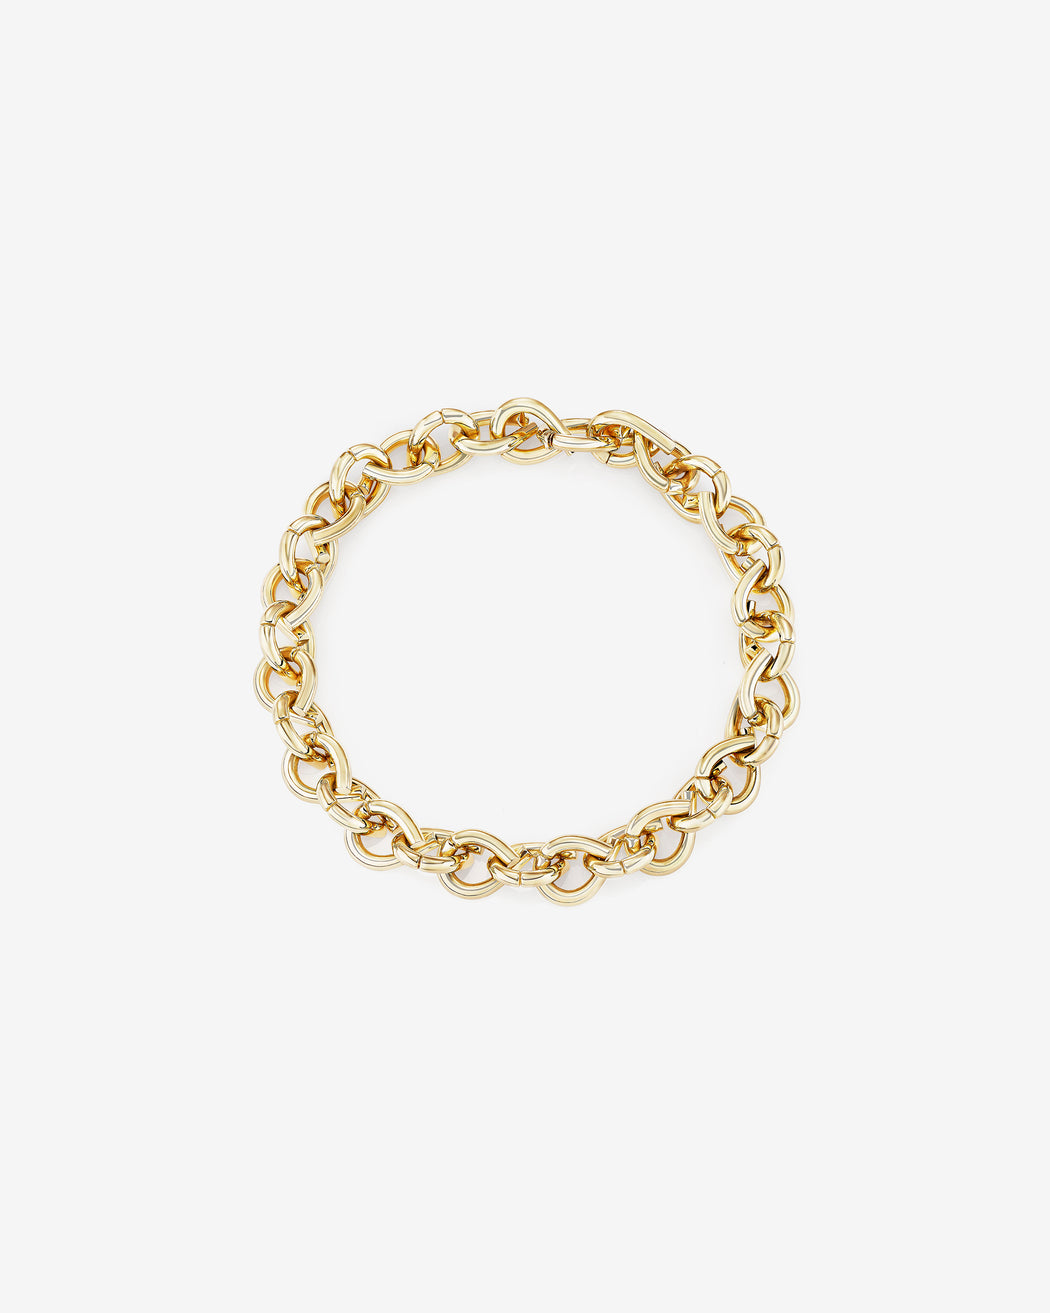 Oera necklace 18k Fairmined yellow gold, Tabayer ethical fine jewelry